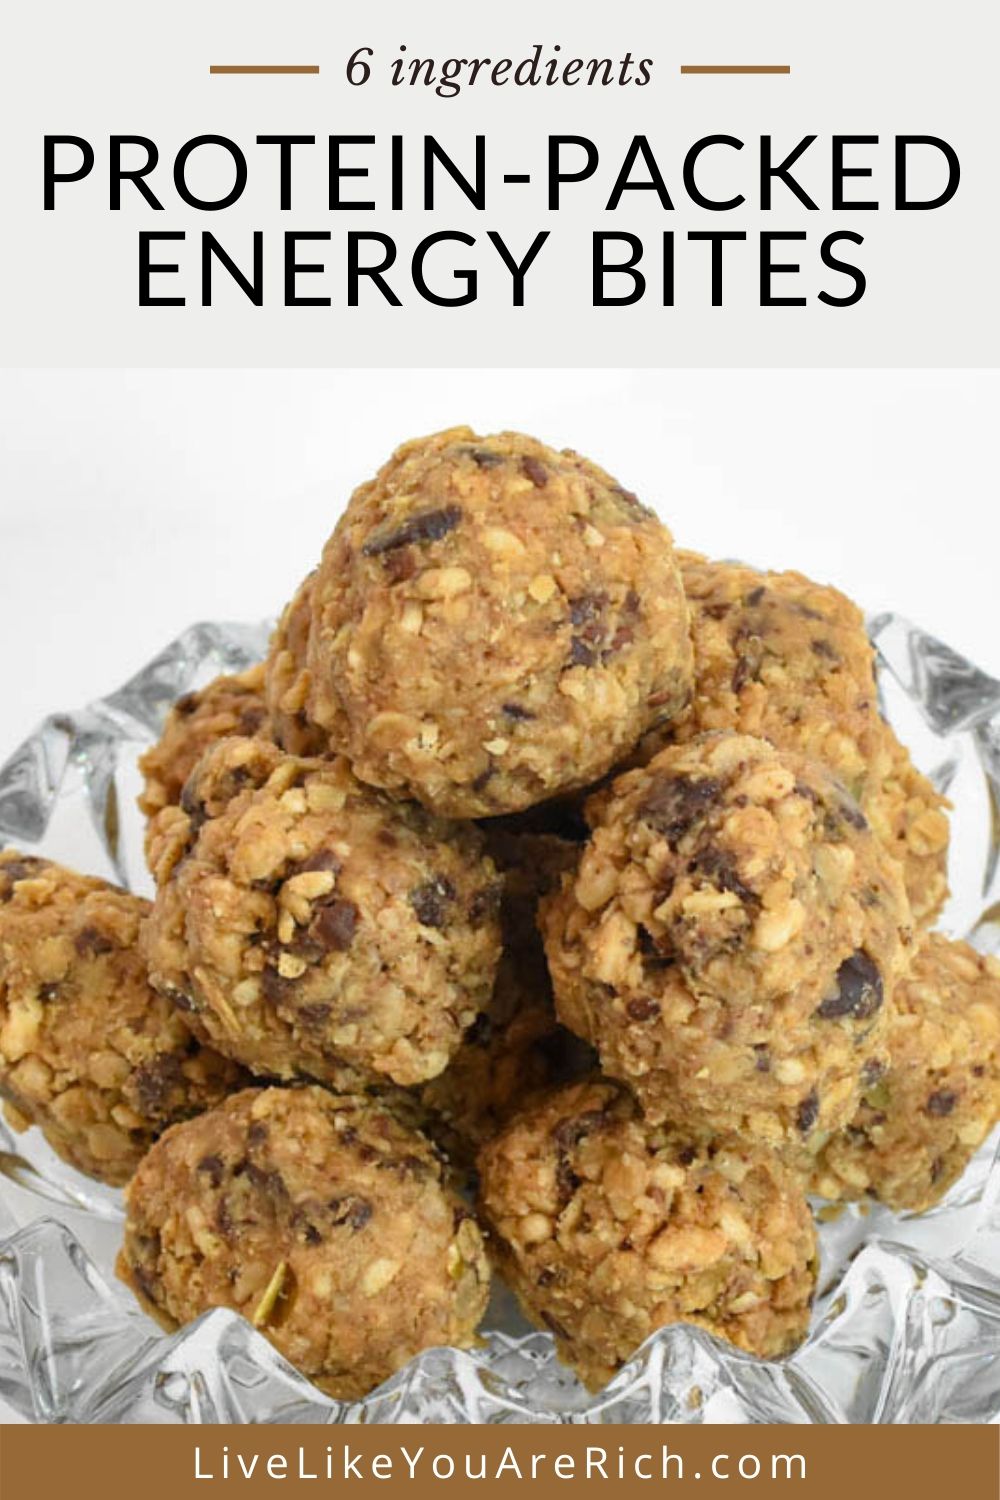 I’ve been making these super yummy no-bake healthy energy bites for years. They are easy to make, they have protein and fiber and yet are sweet enough to satisfy a sugar craving. This is a great snack for kids and the whole family.